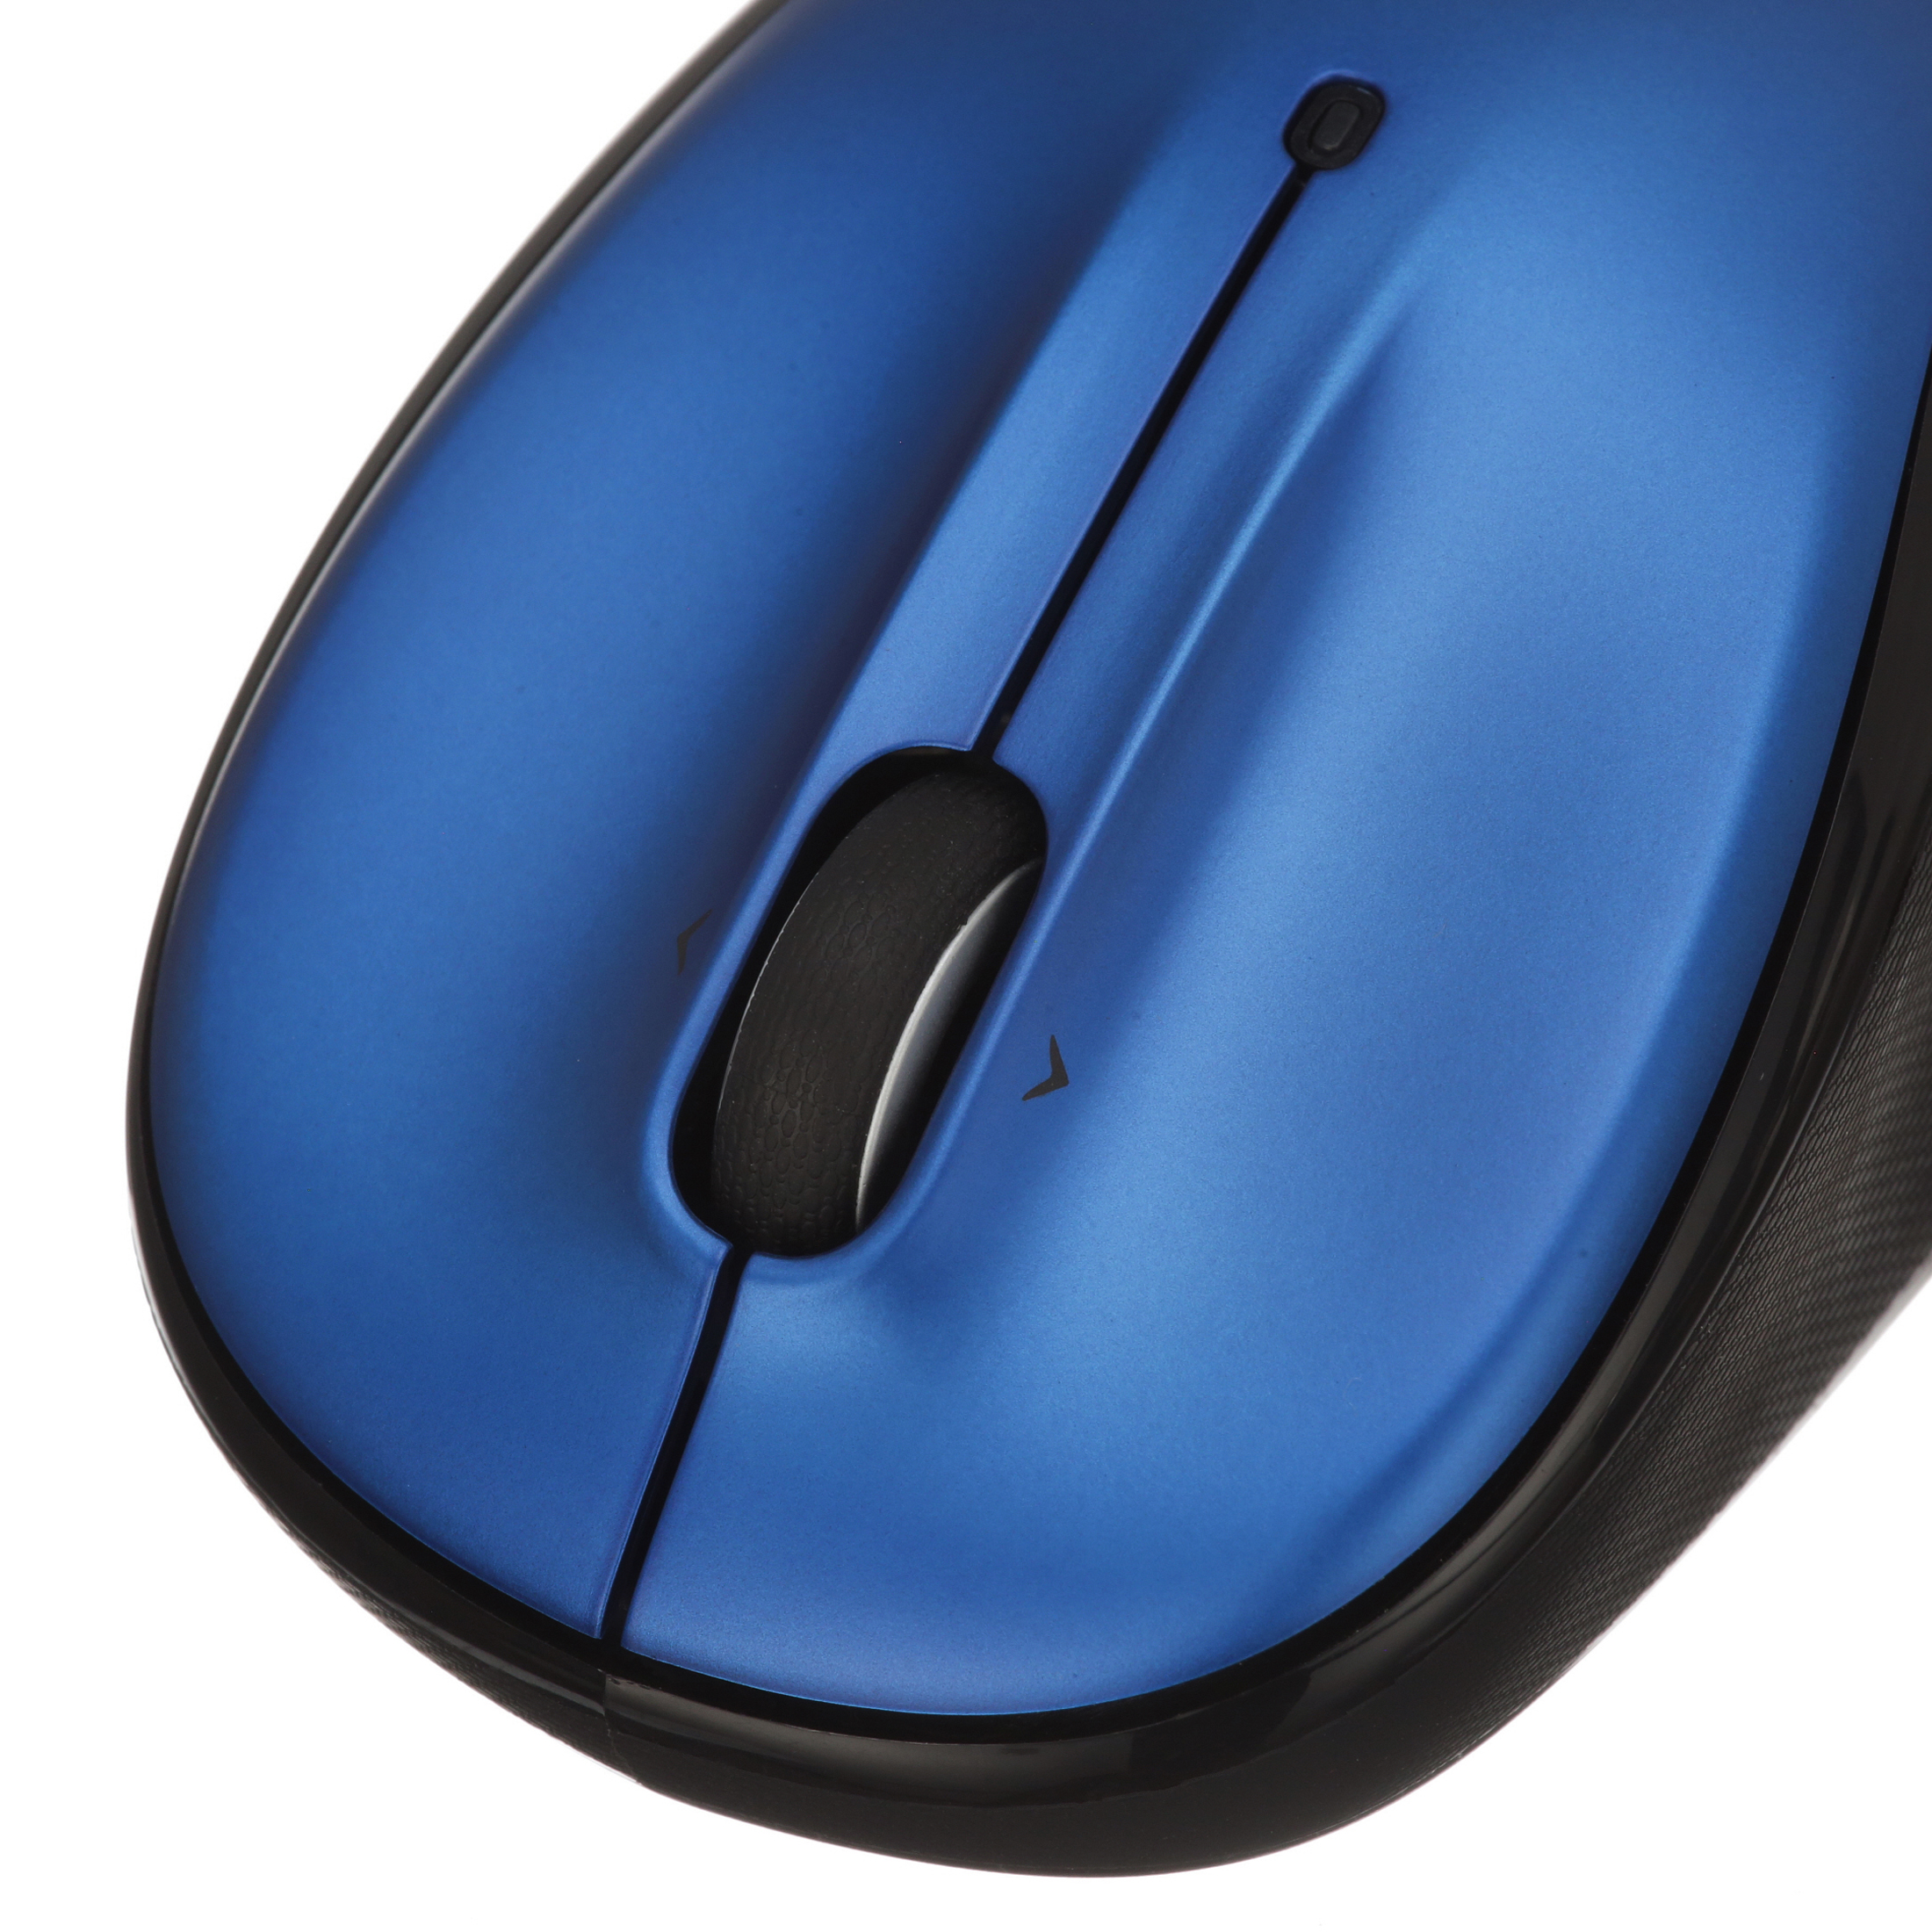 Logitech Compact Wireless Mouse, 2.4 GHz with USB Unifying Receiver, Optical Tracking, Blue - image 4 of 6